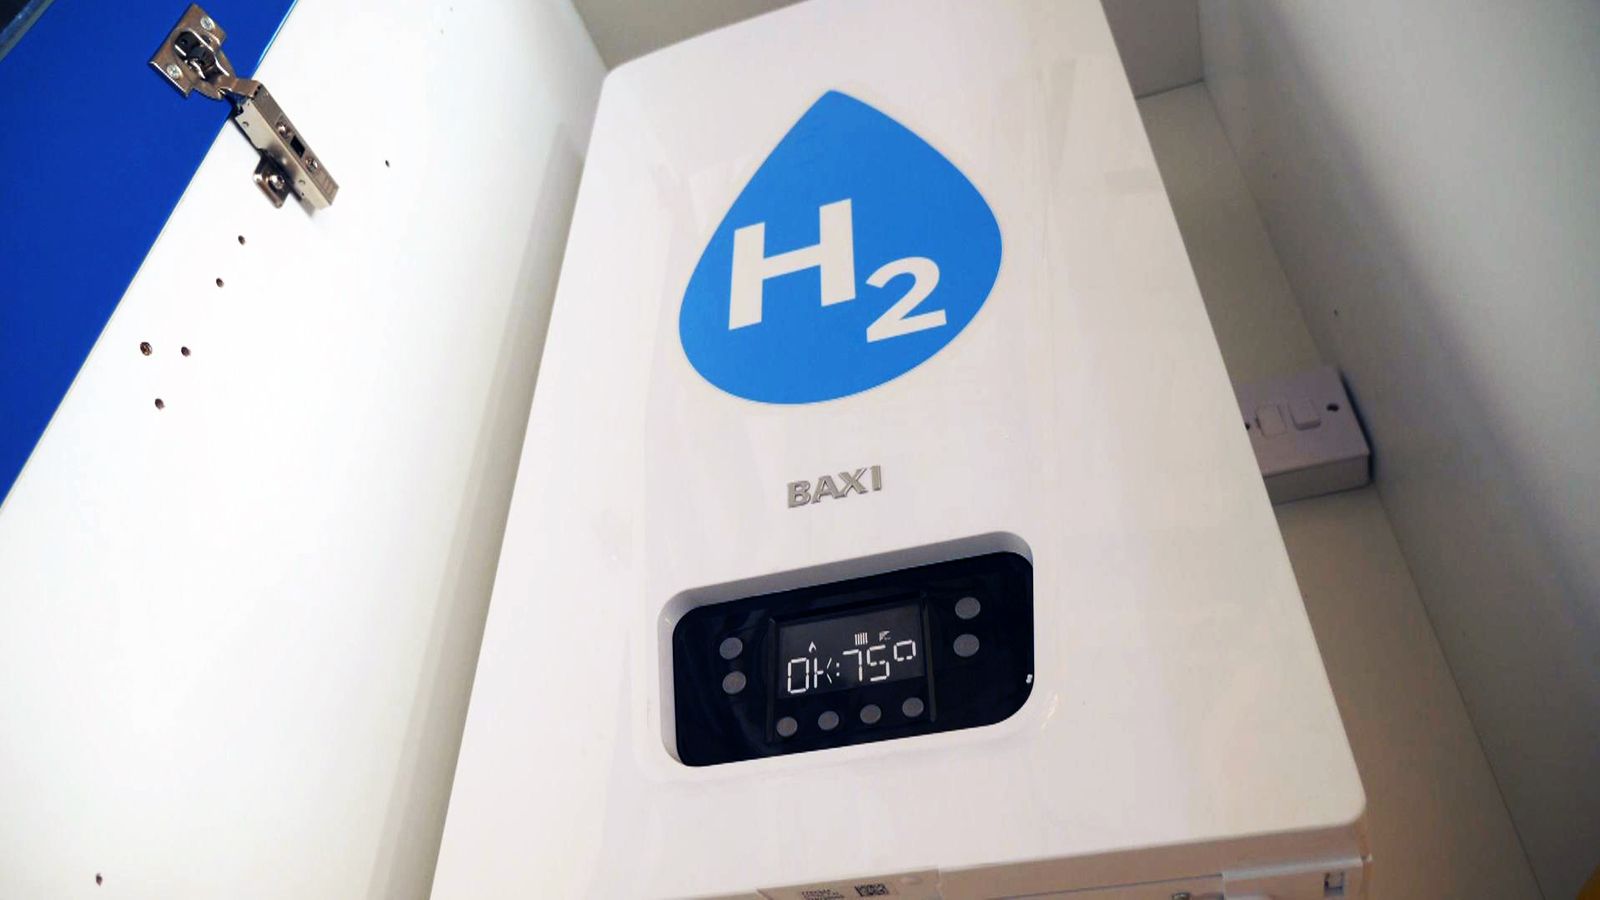 Energy minister says hydrogen will 'not play a major role' in heating homes in the UK